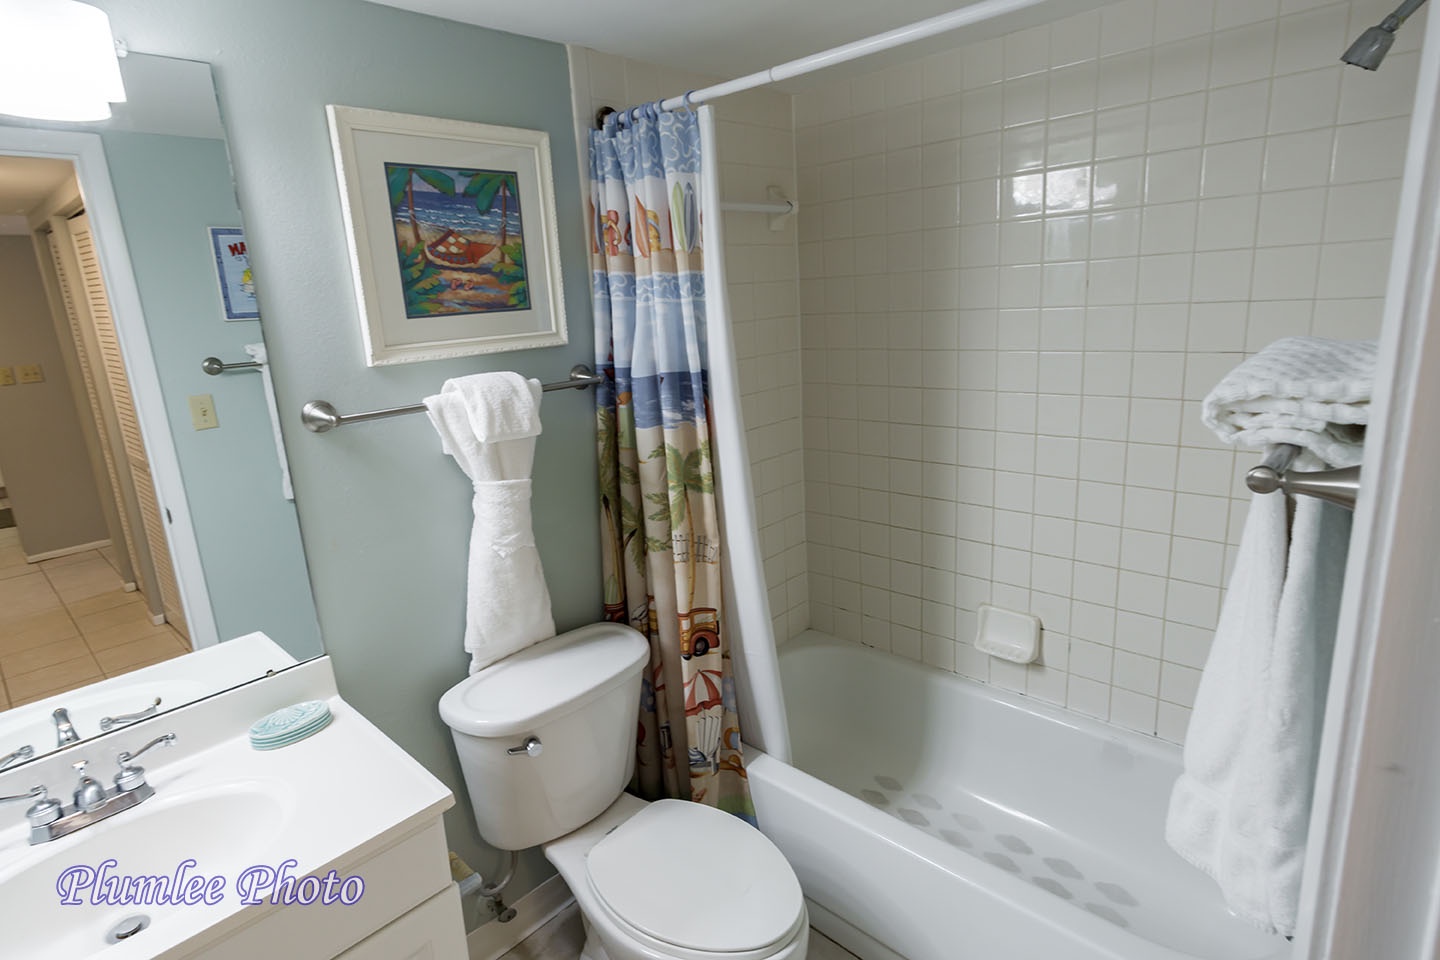 The Hallway Bathroom has a tub/shower, perfect for getting the little ones cleaned up.